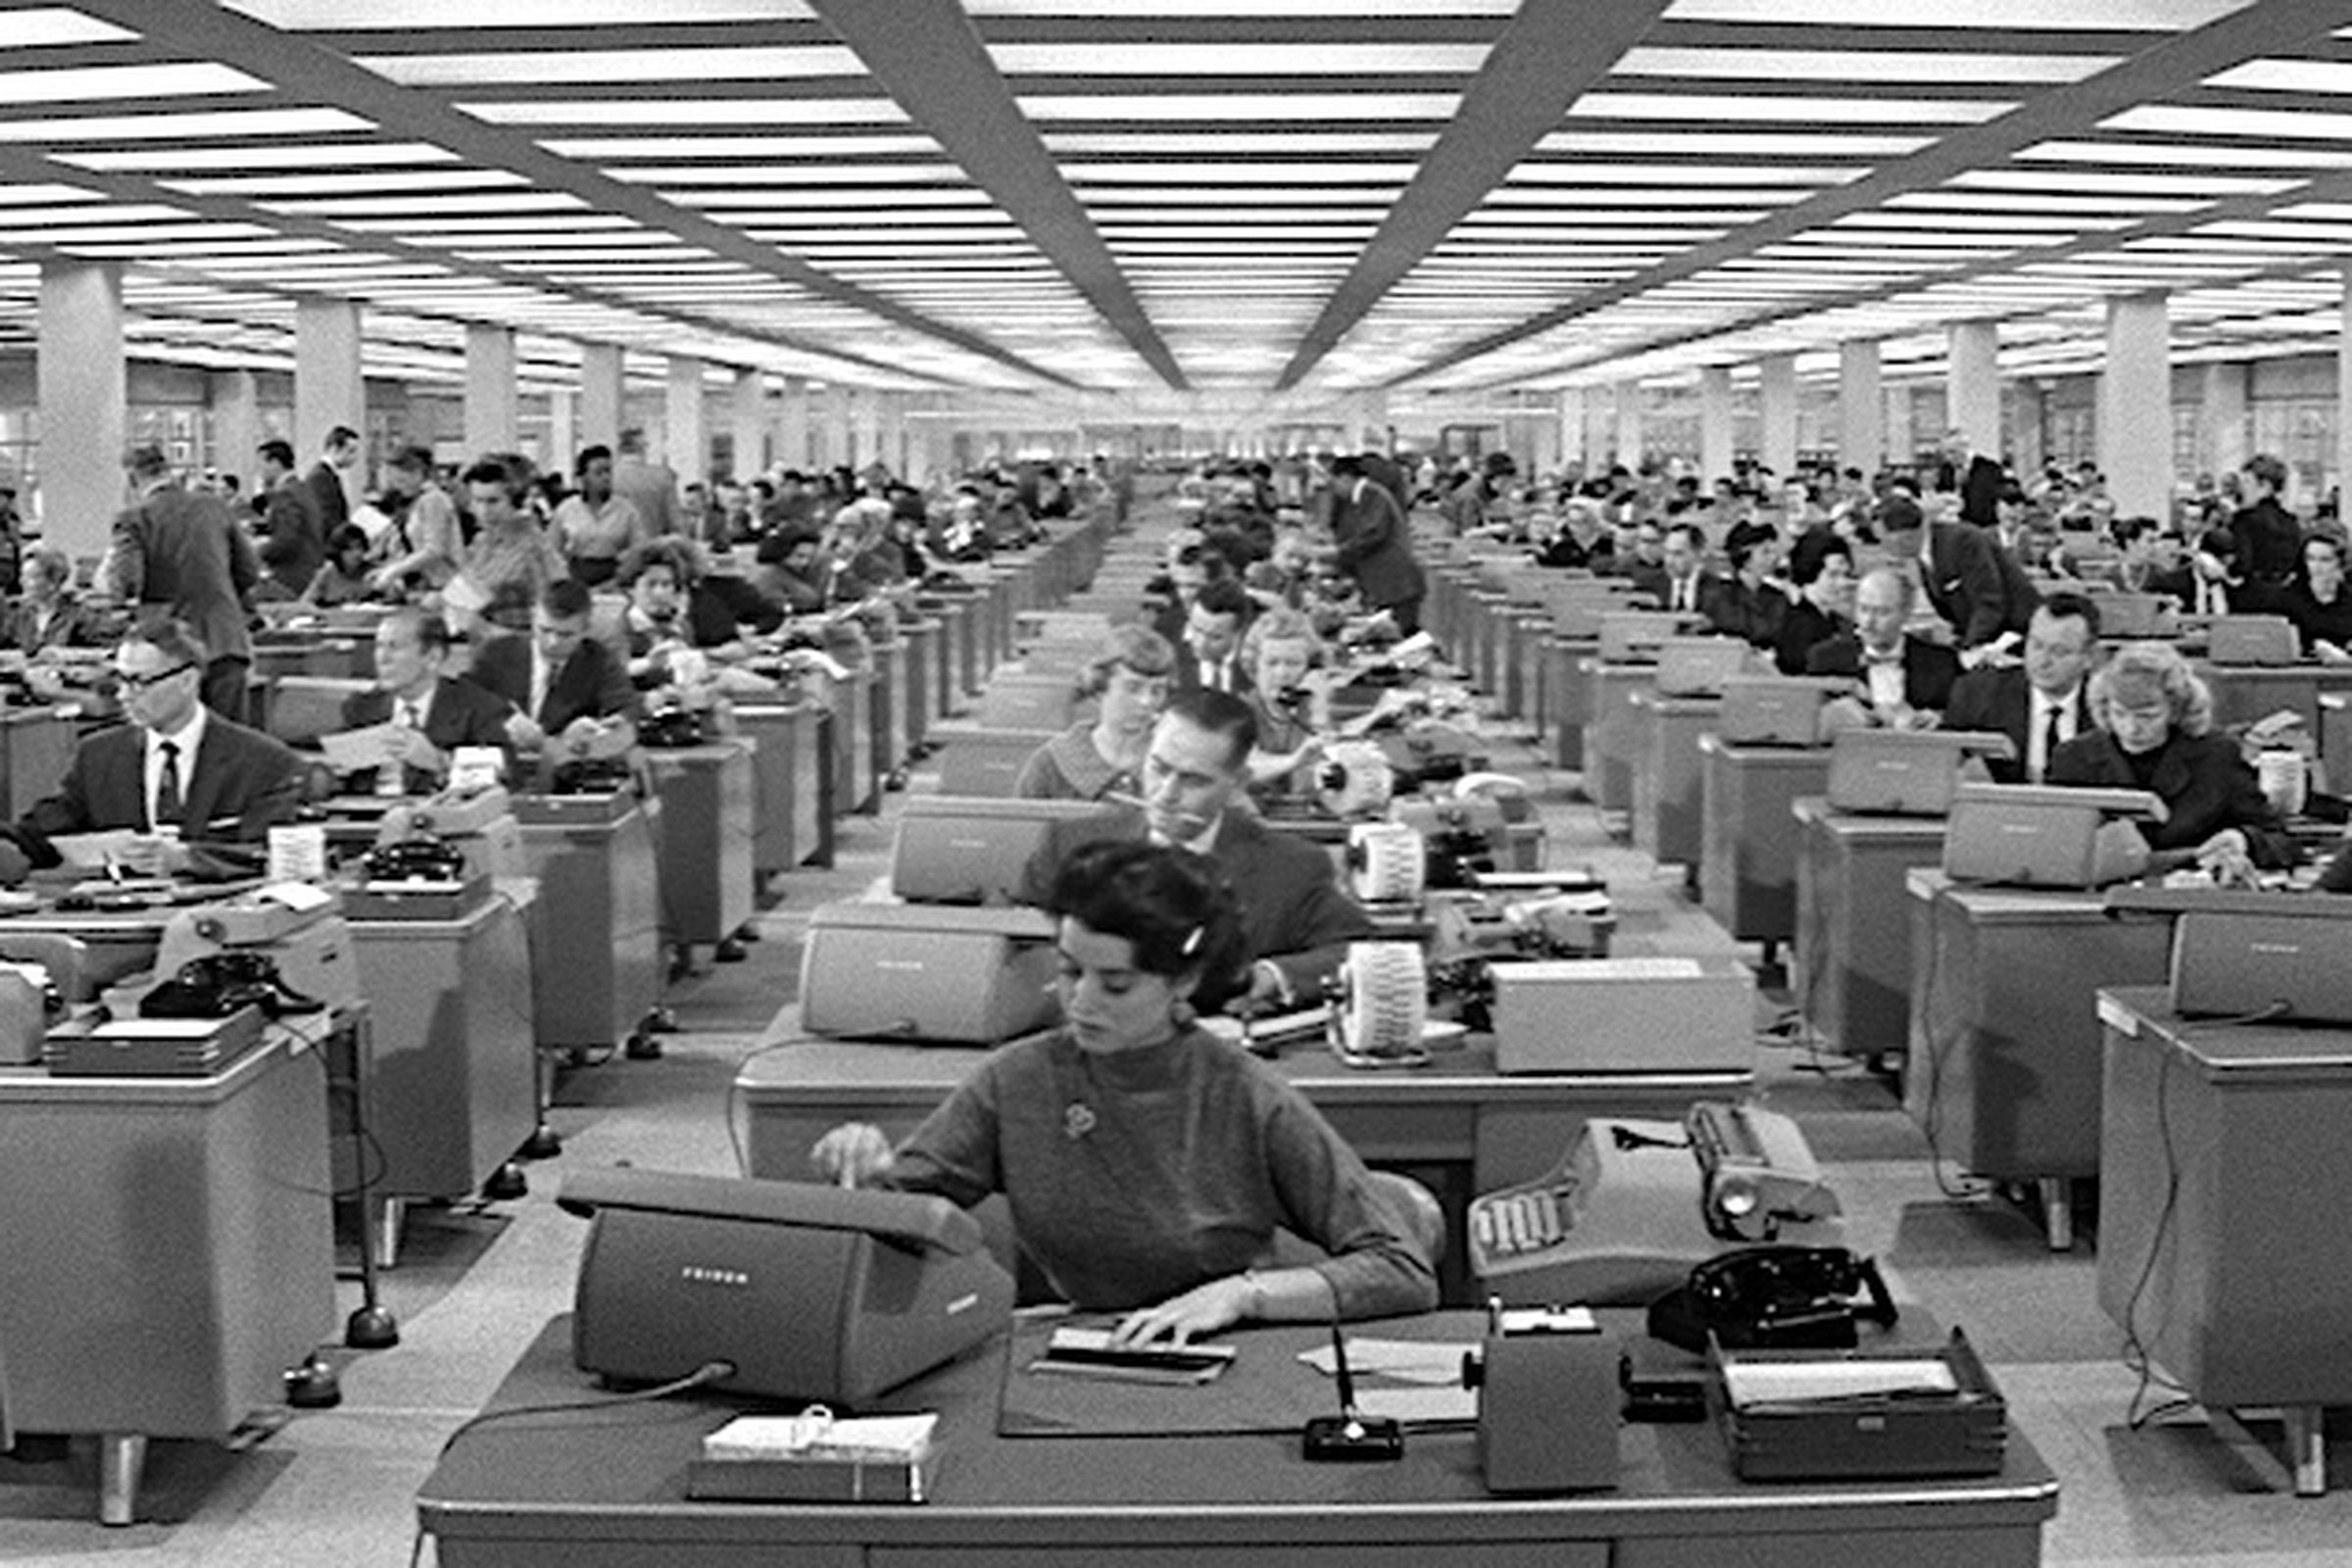 A 1960s-style open office, with rows of desks and people working.